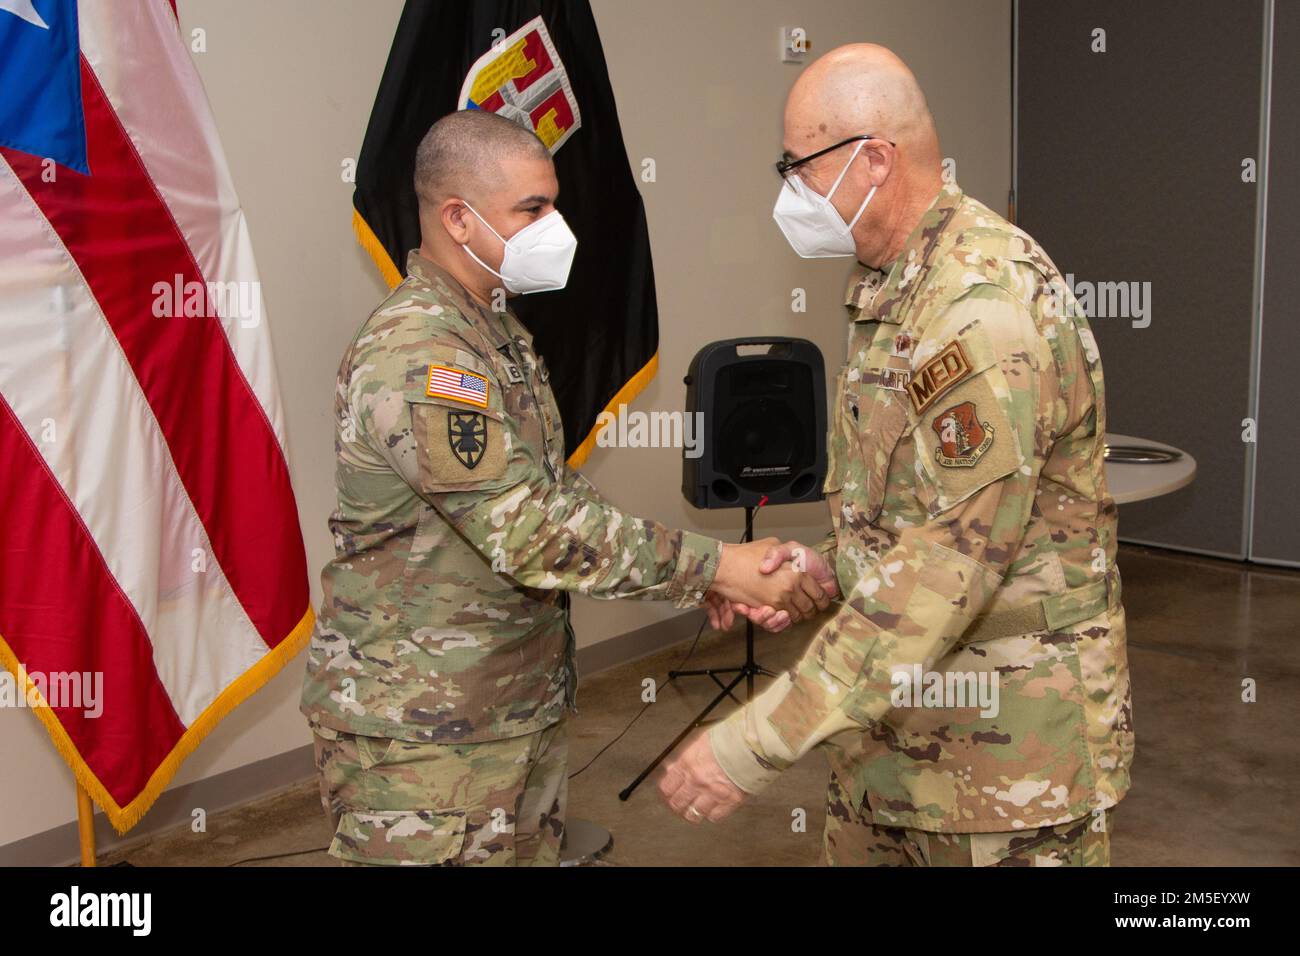 Lt. Col. Francisco Nieves greets Major Luis E. Medina during his promotion ceremony at Fort Bucanan, Puerto Rico, March 9, 2022. The Puerto Rico Army National Guard requires capable and effective officers to lead and instruct our soldiers in the day-to-day operations. Stock Photo